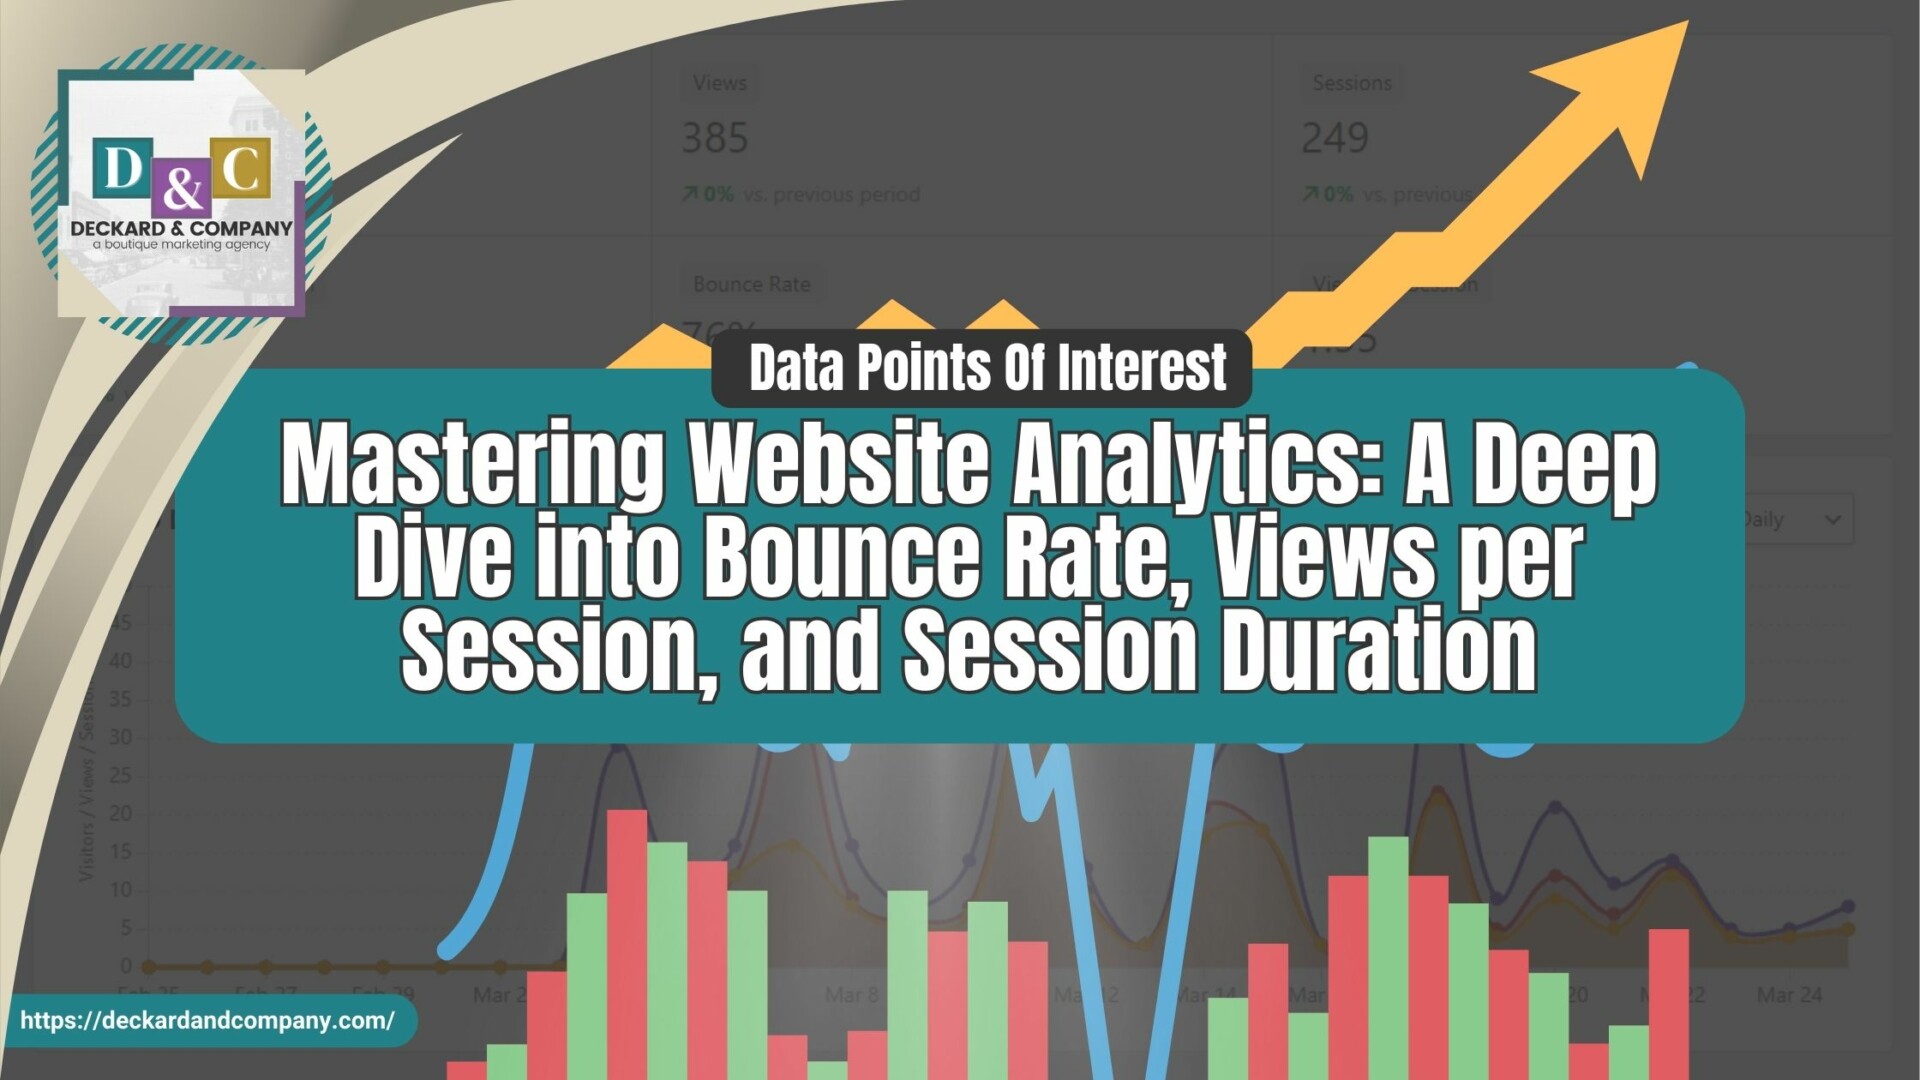 Mastering Website Analytics A Deep Dive into Bounce Rate, Views per Session, and Session Duration with Deckard & Company in Bradenton, Florida